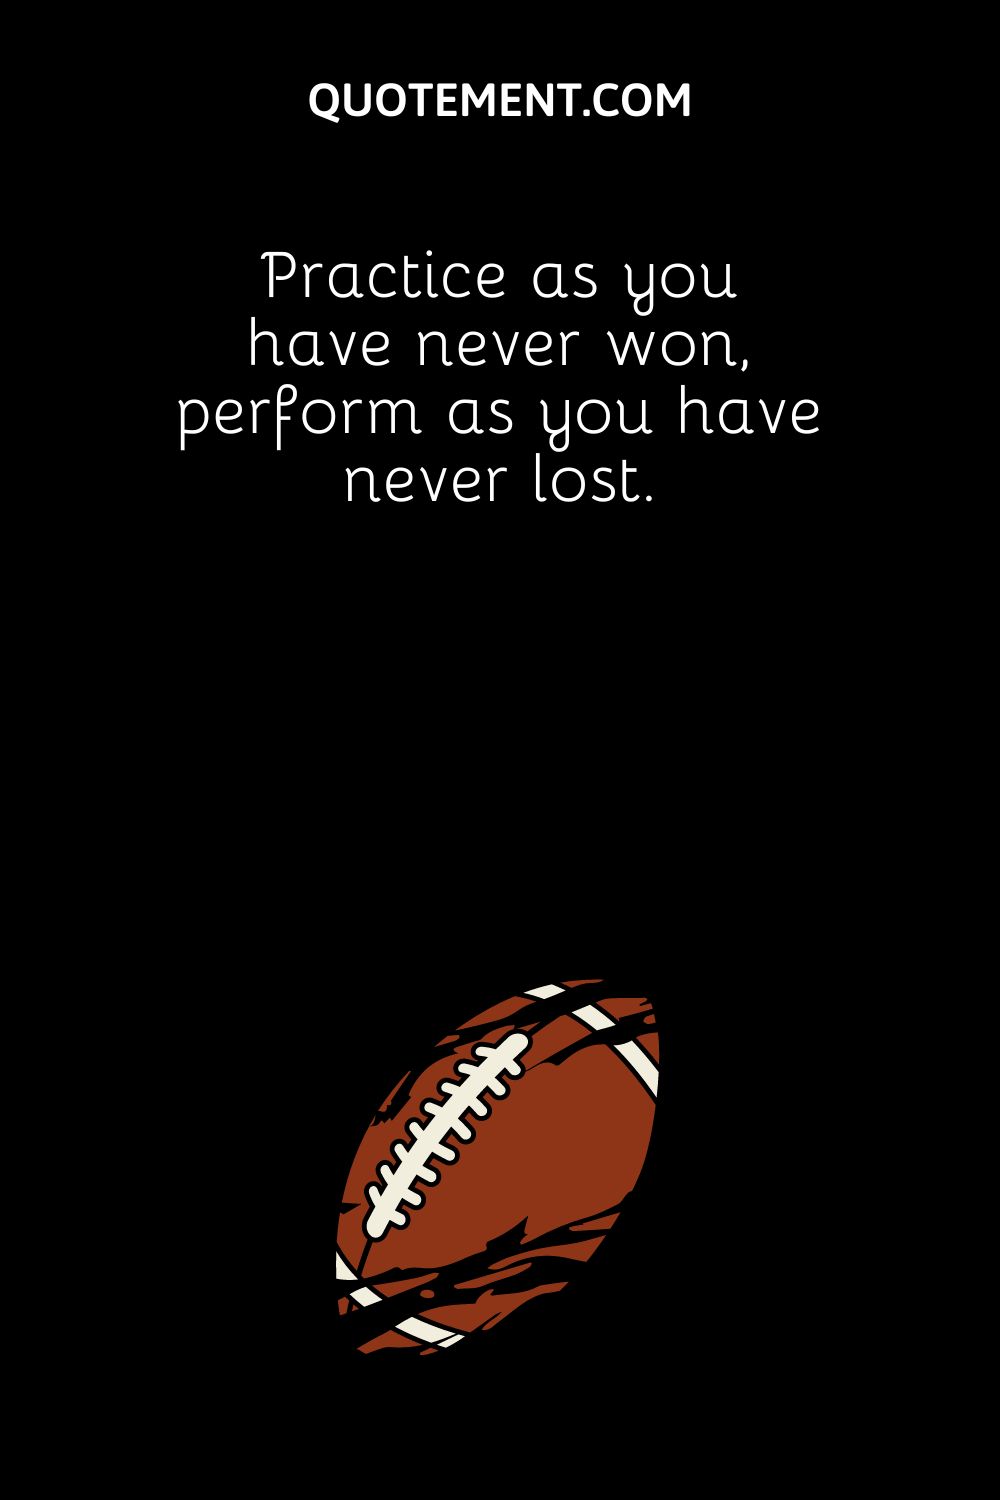 Practice as you have never won, perform as you have never lost